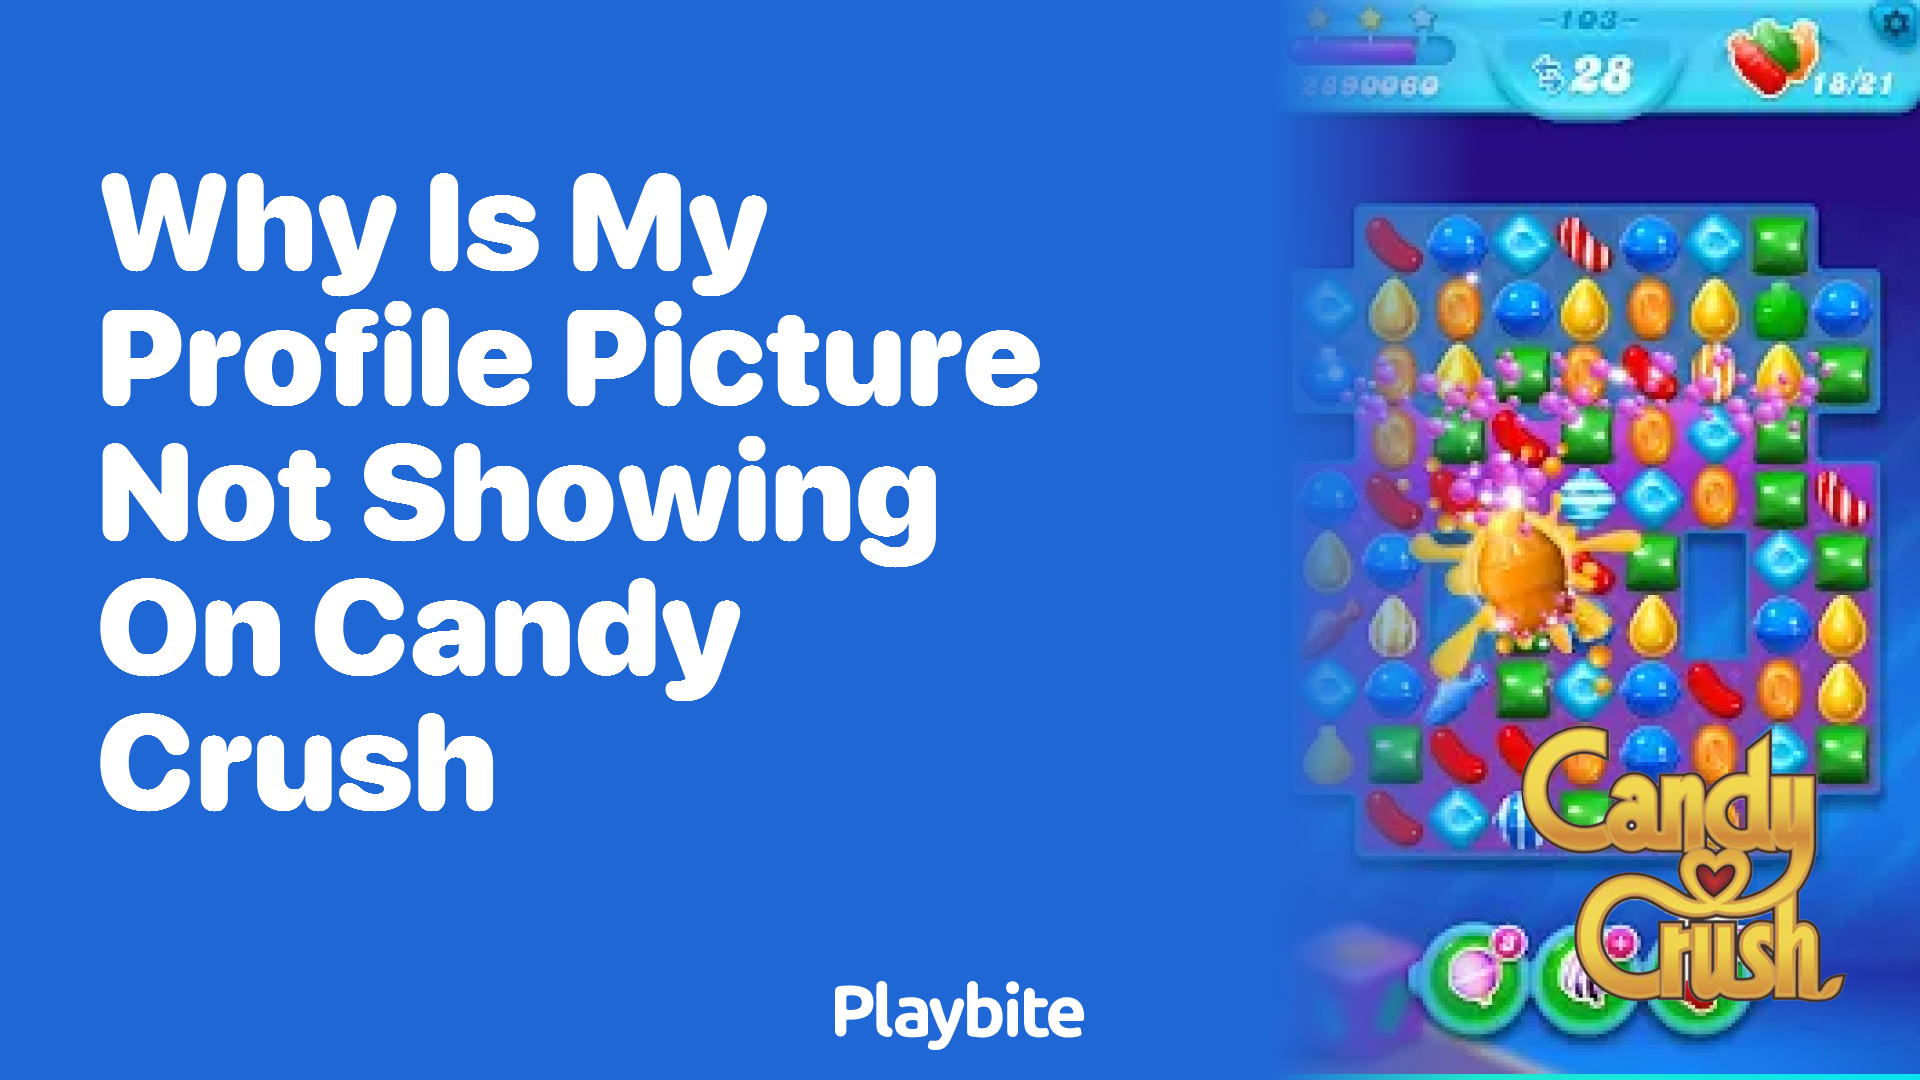 Why is My Profile Picture Not Showing on Candy Crush?